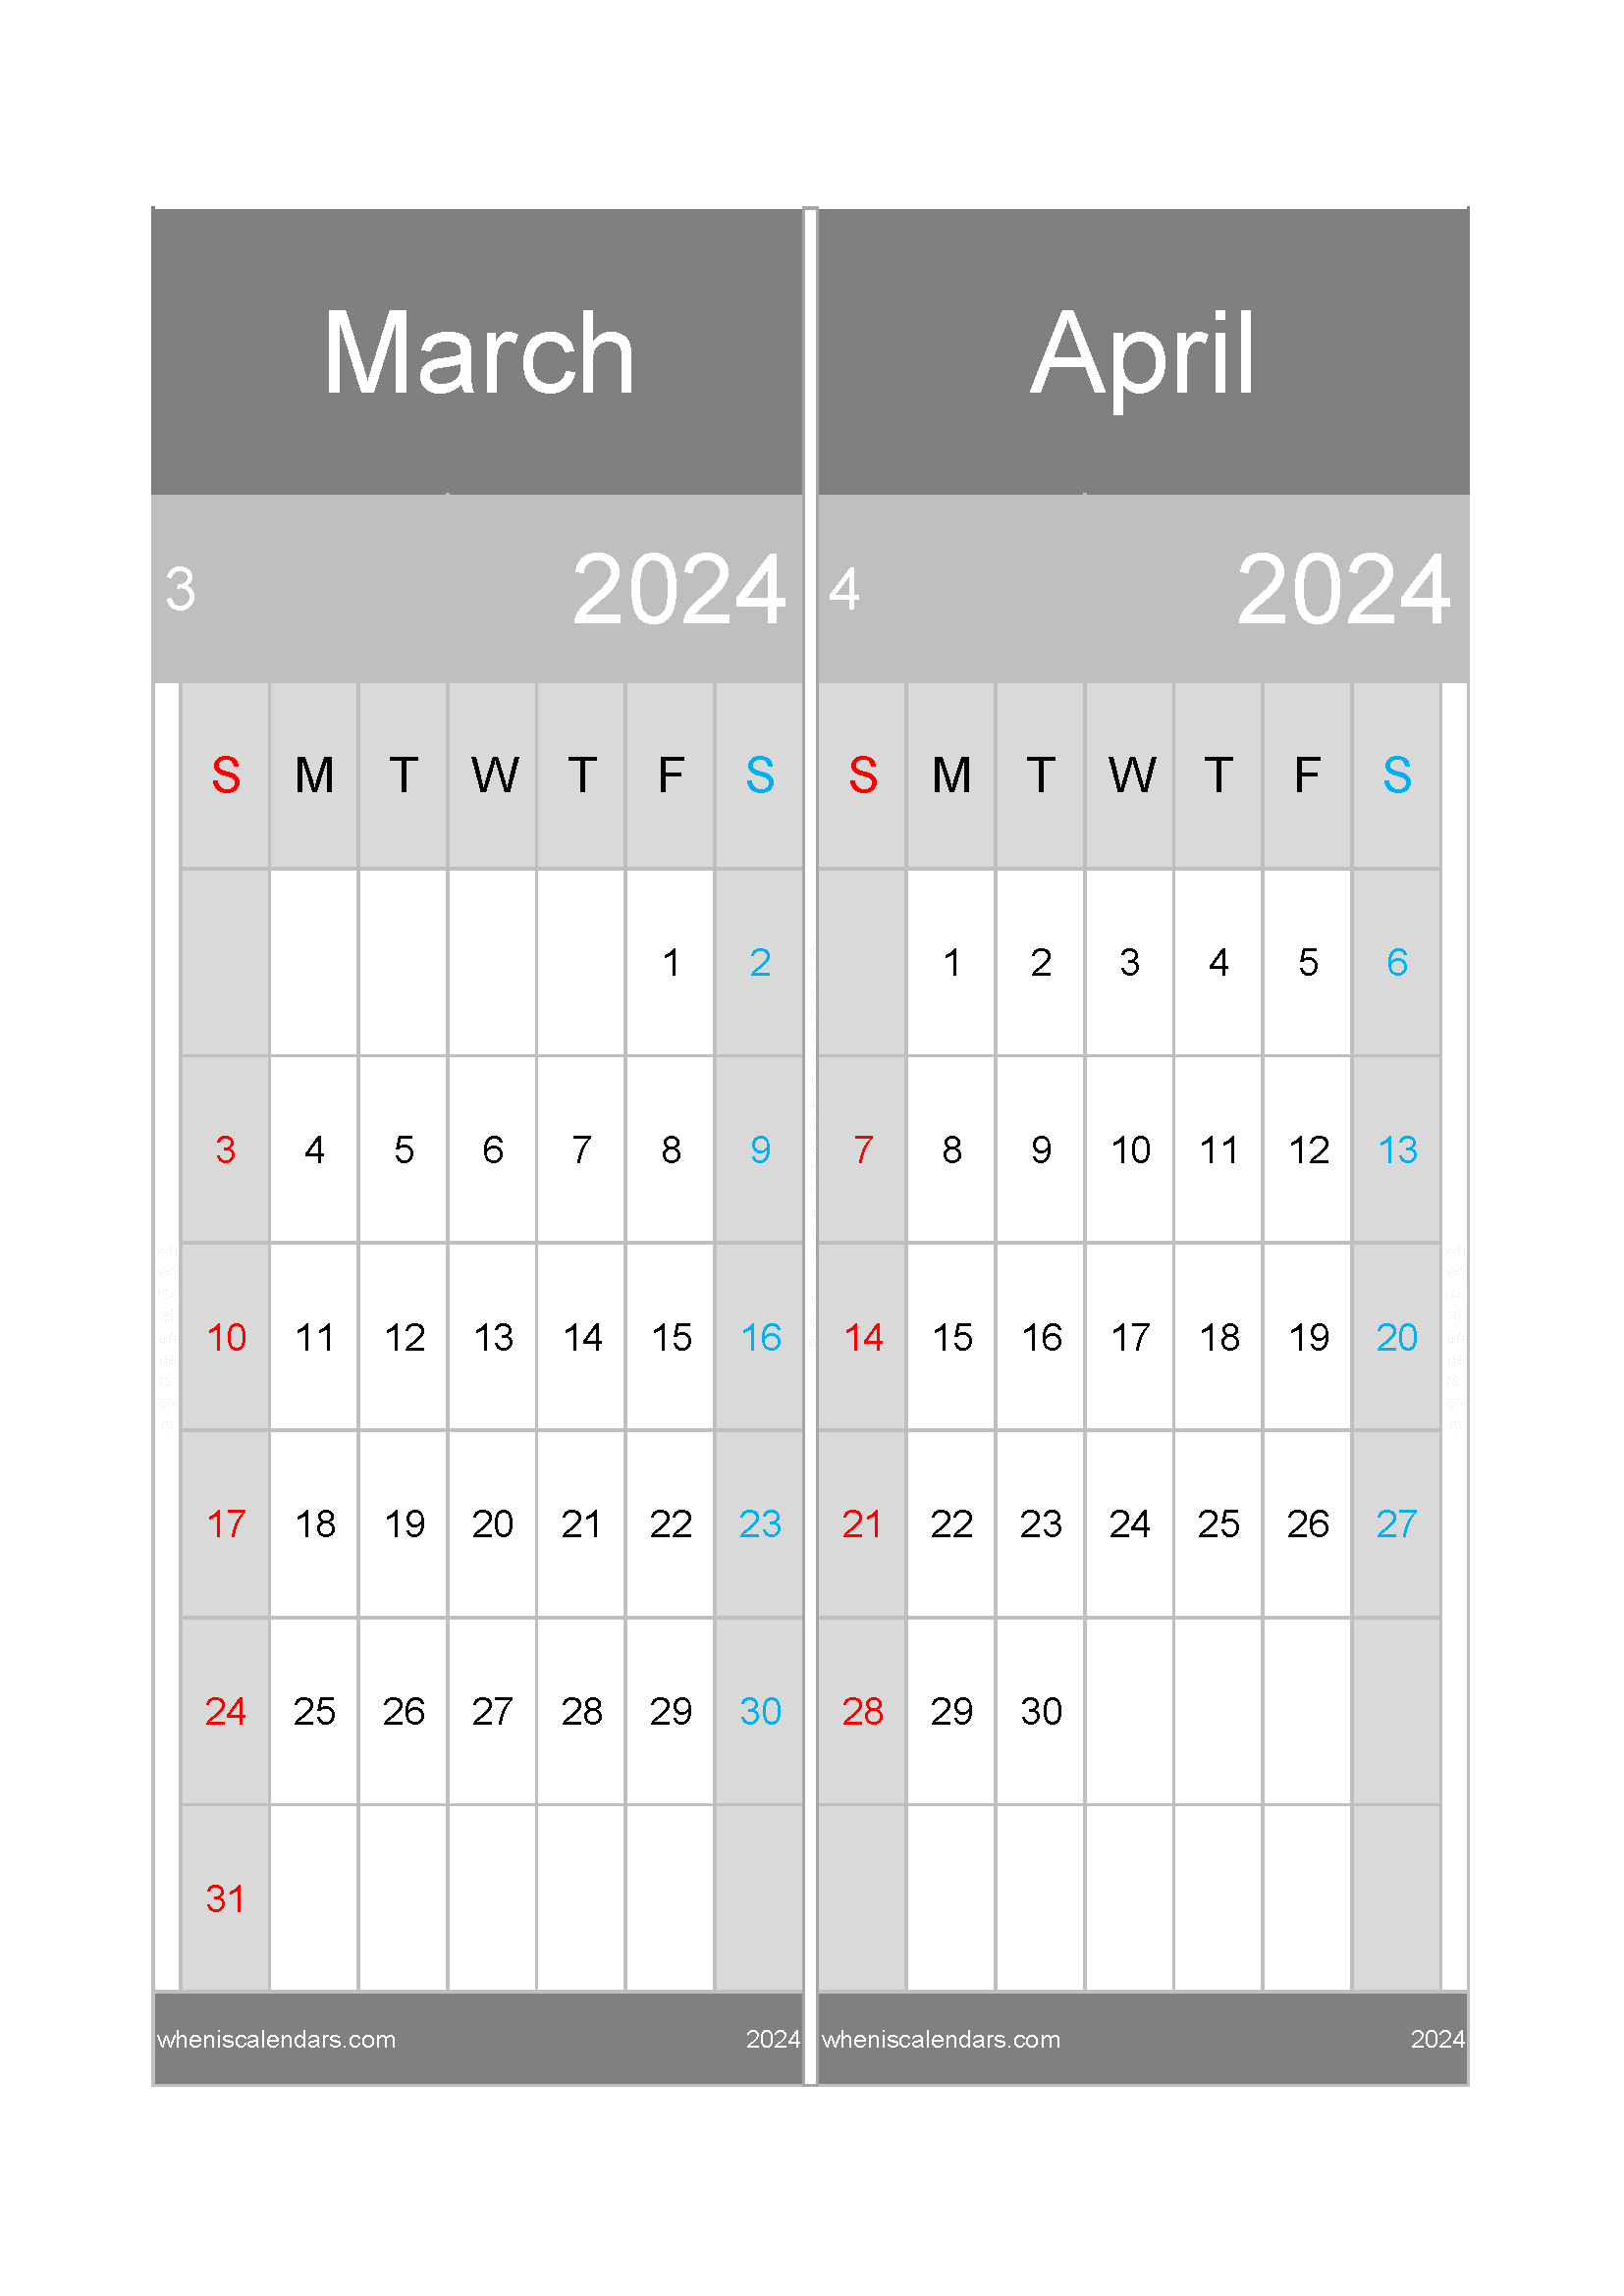 Download calendar for the month of March and April 2024 A4 MA24047